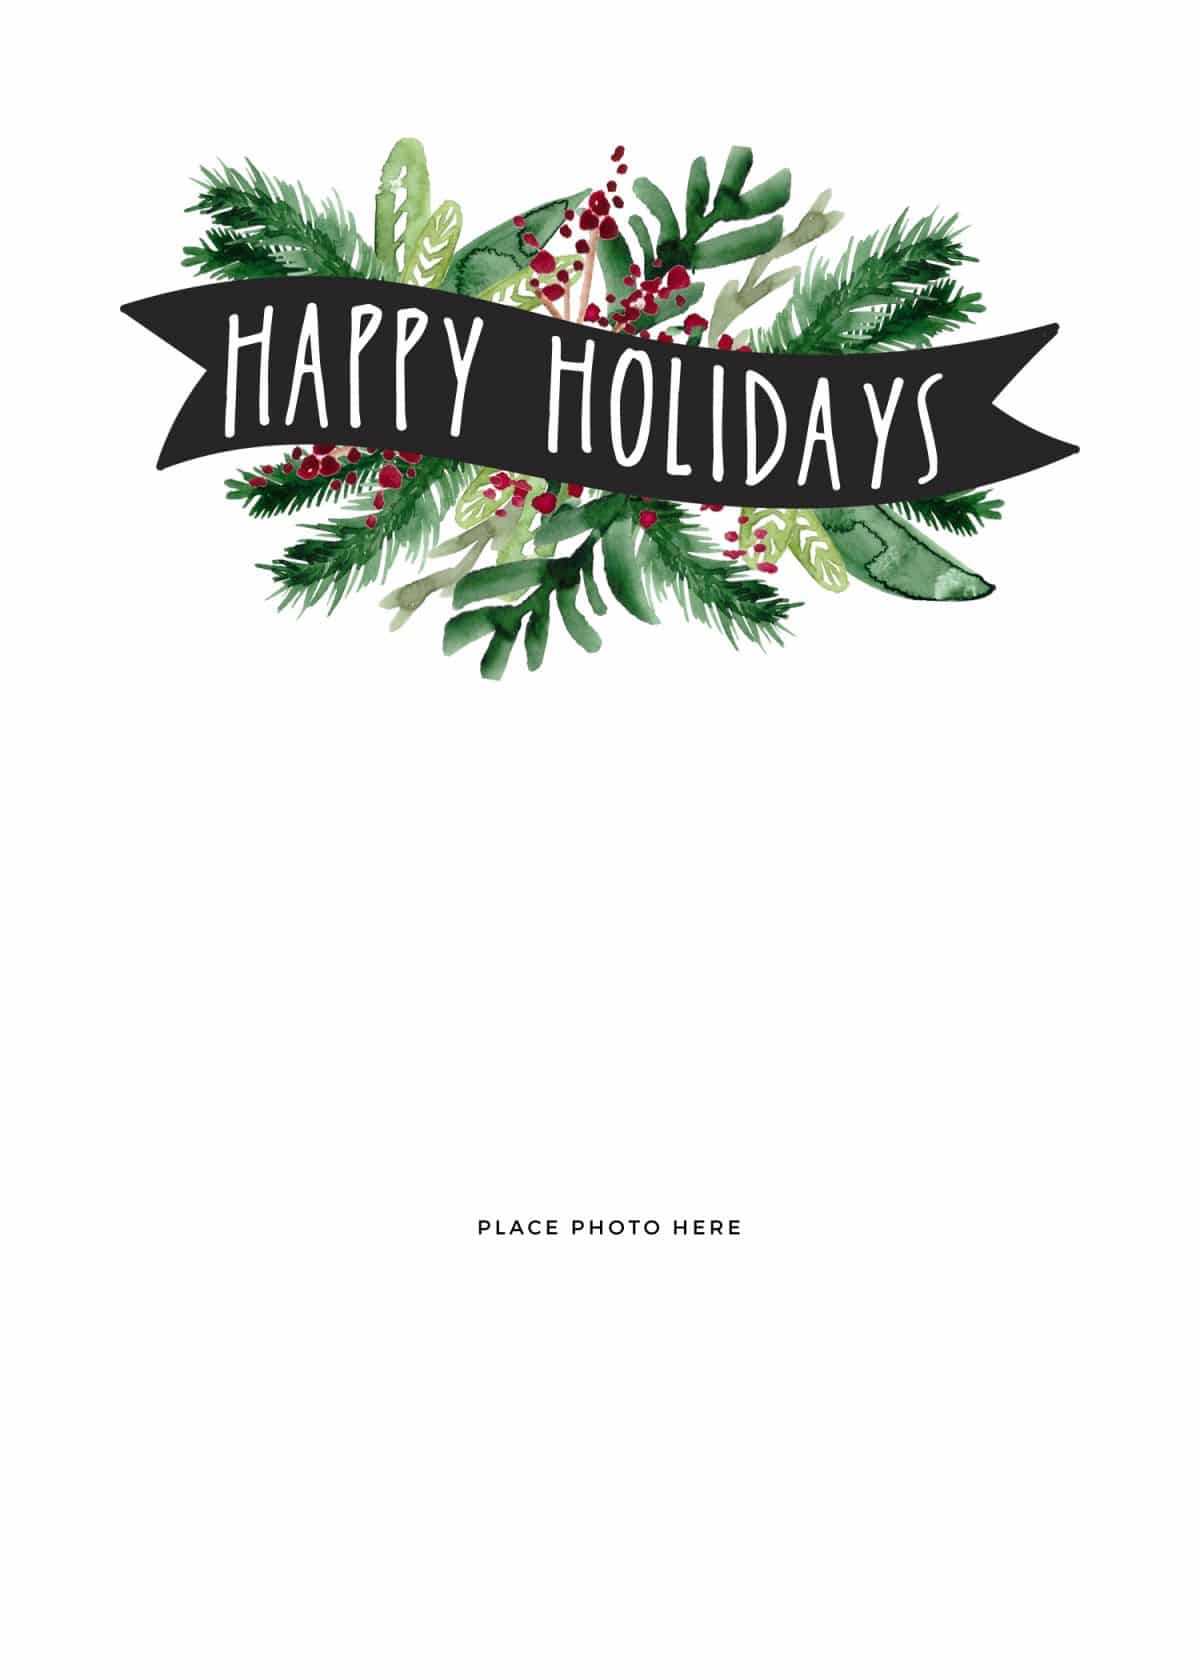 Make Your Own Photo Christmas Cards (For Free!) – Somewhat Within Diy Christmas Card Templates